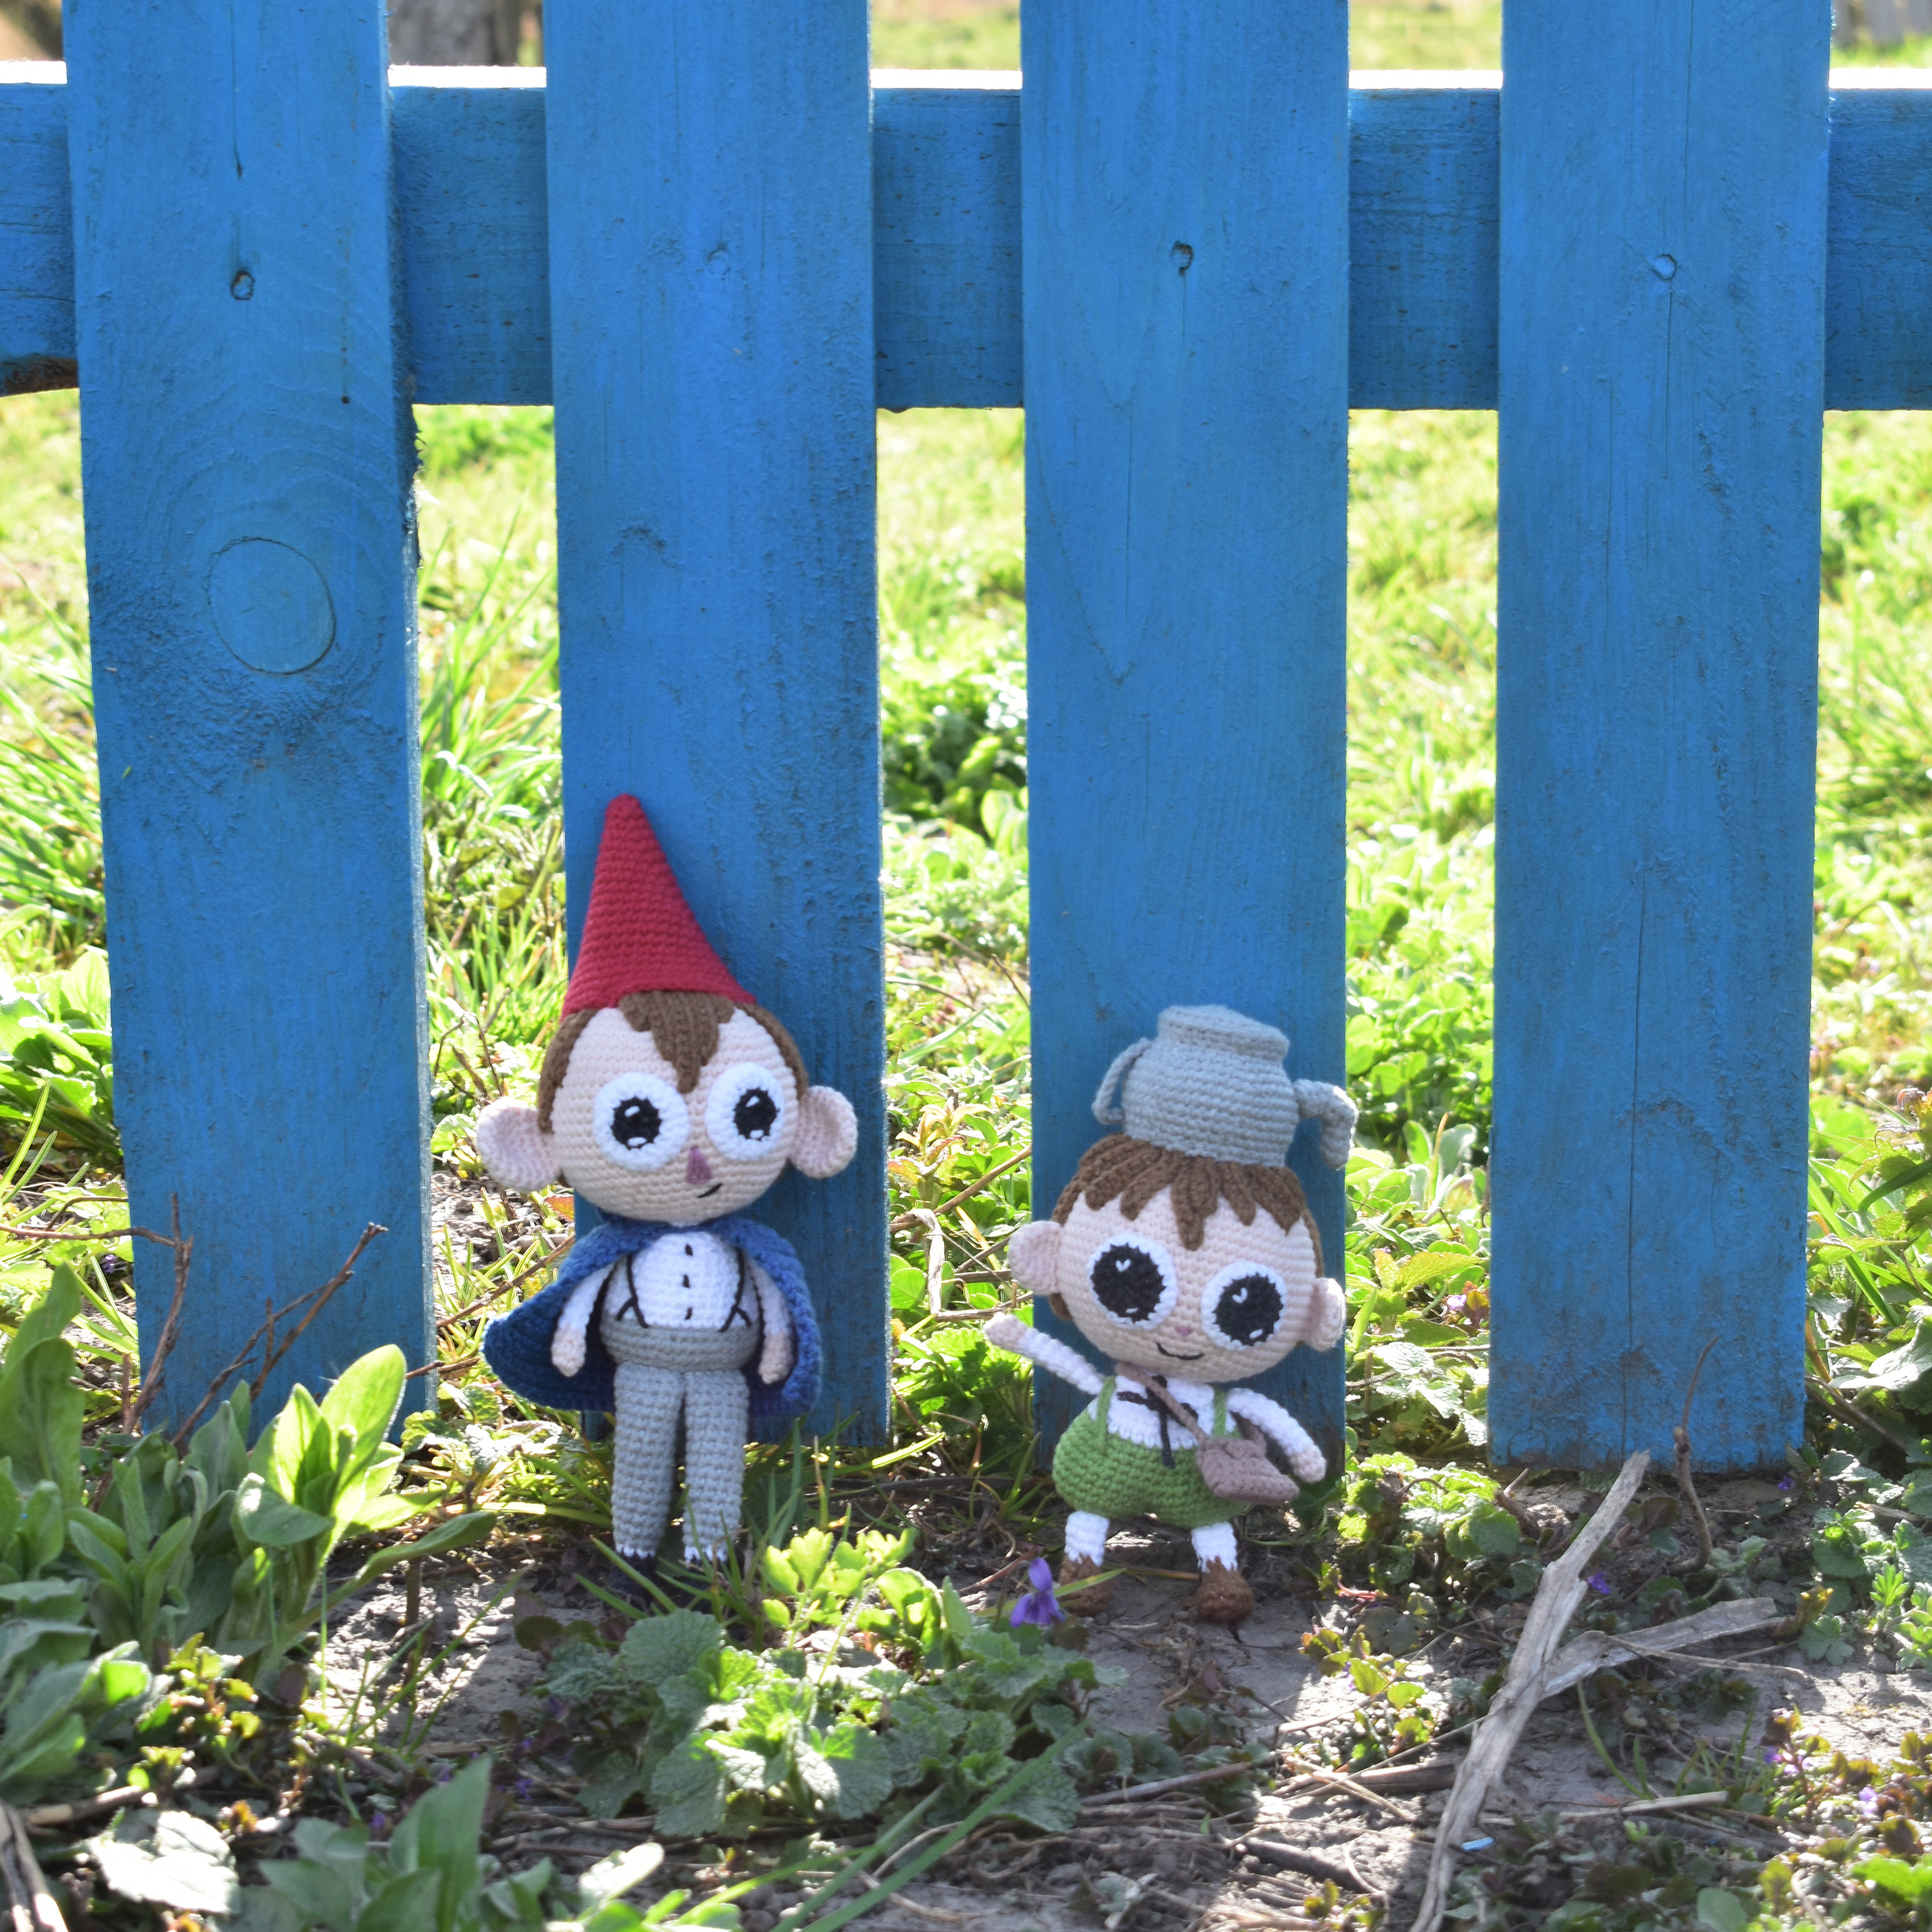 Over the Garden Wall Plush Toys Wirt, Greg, Beatrice 